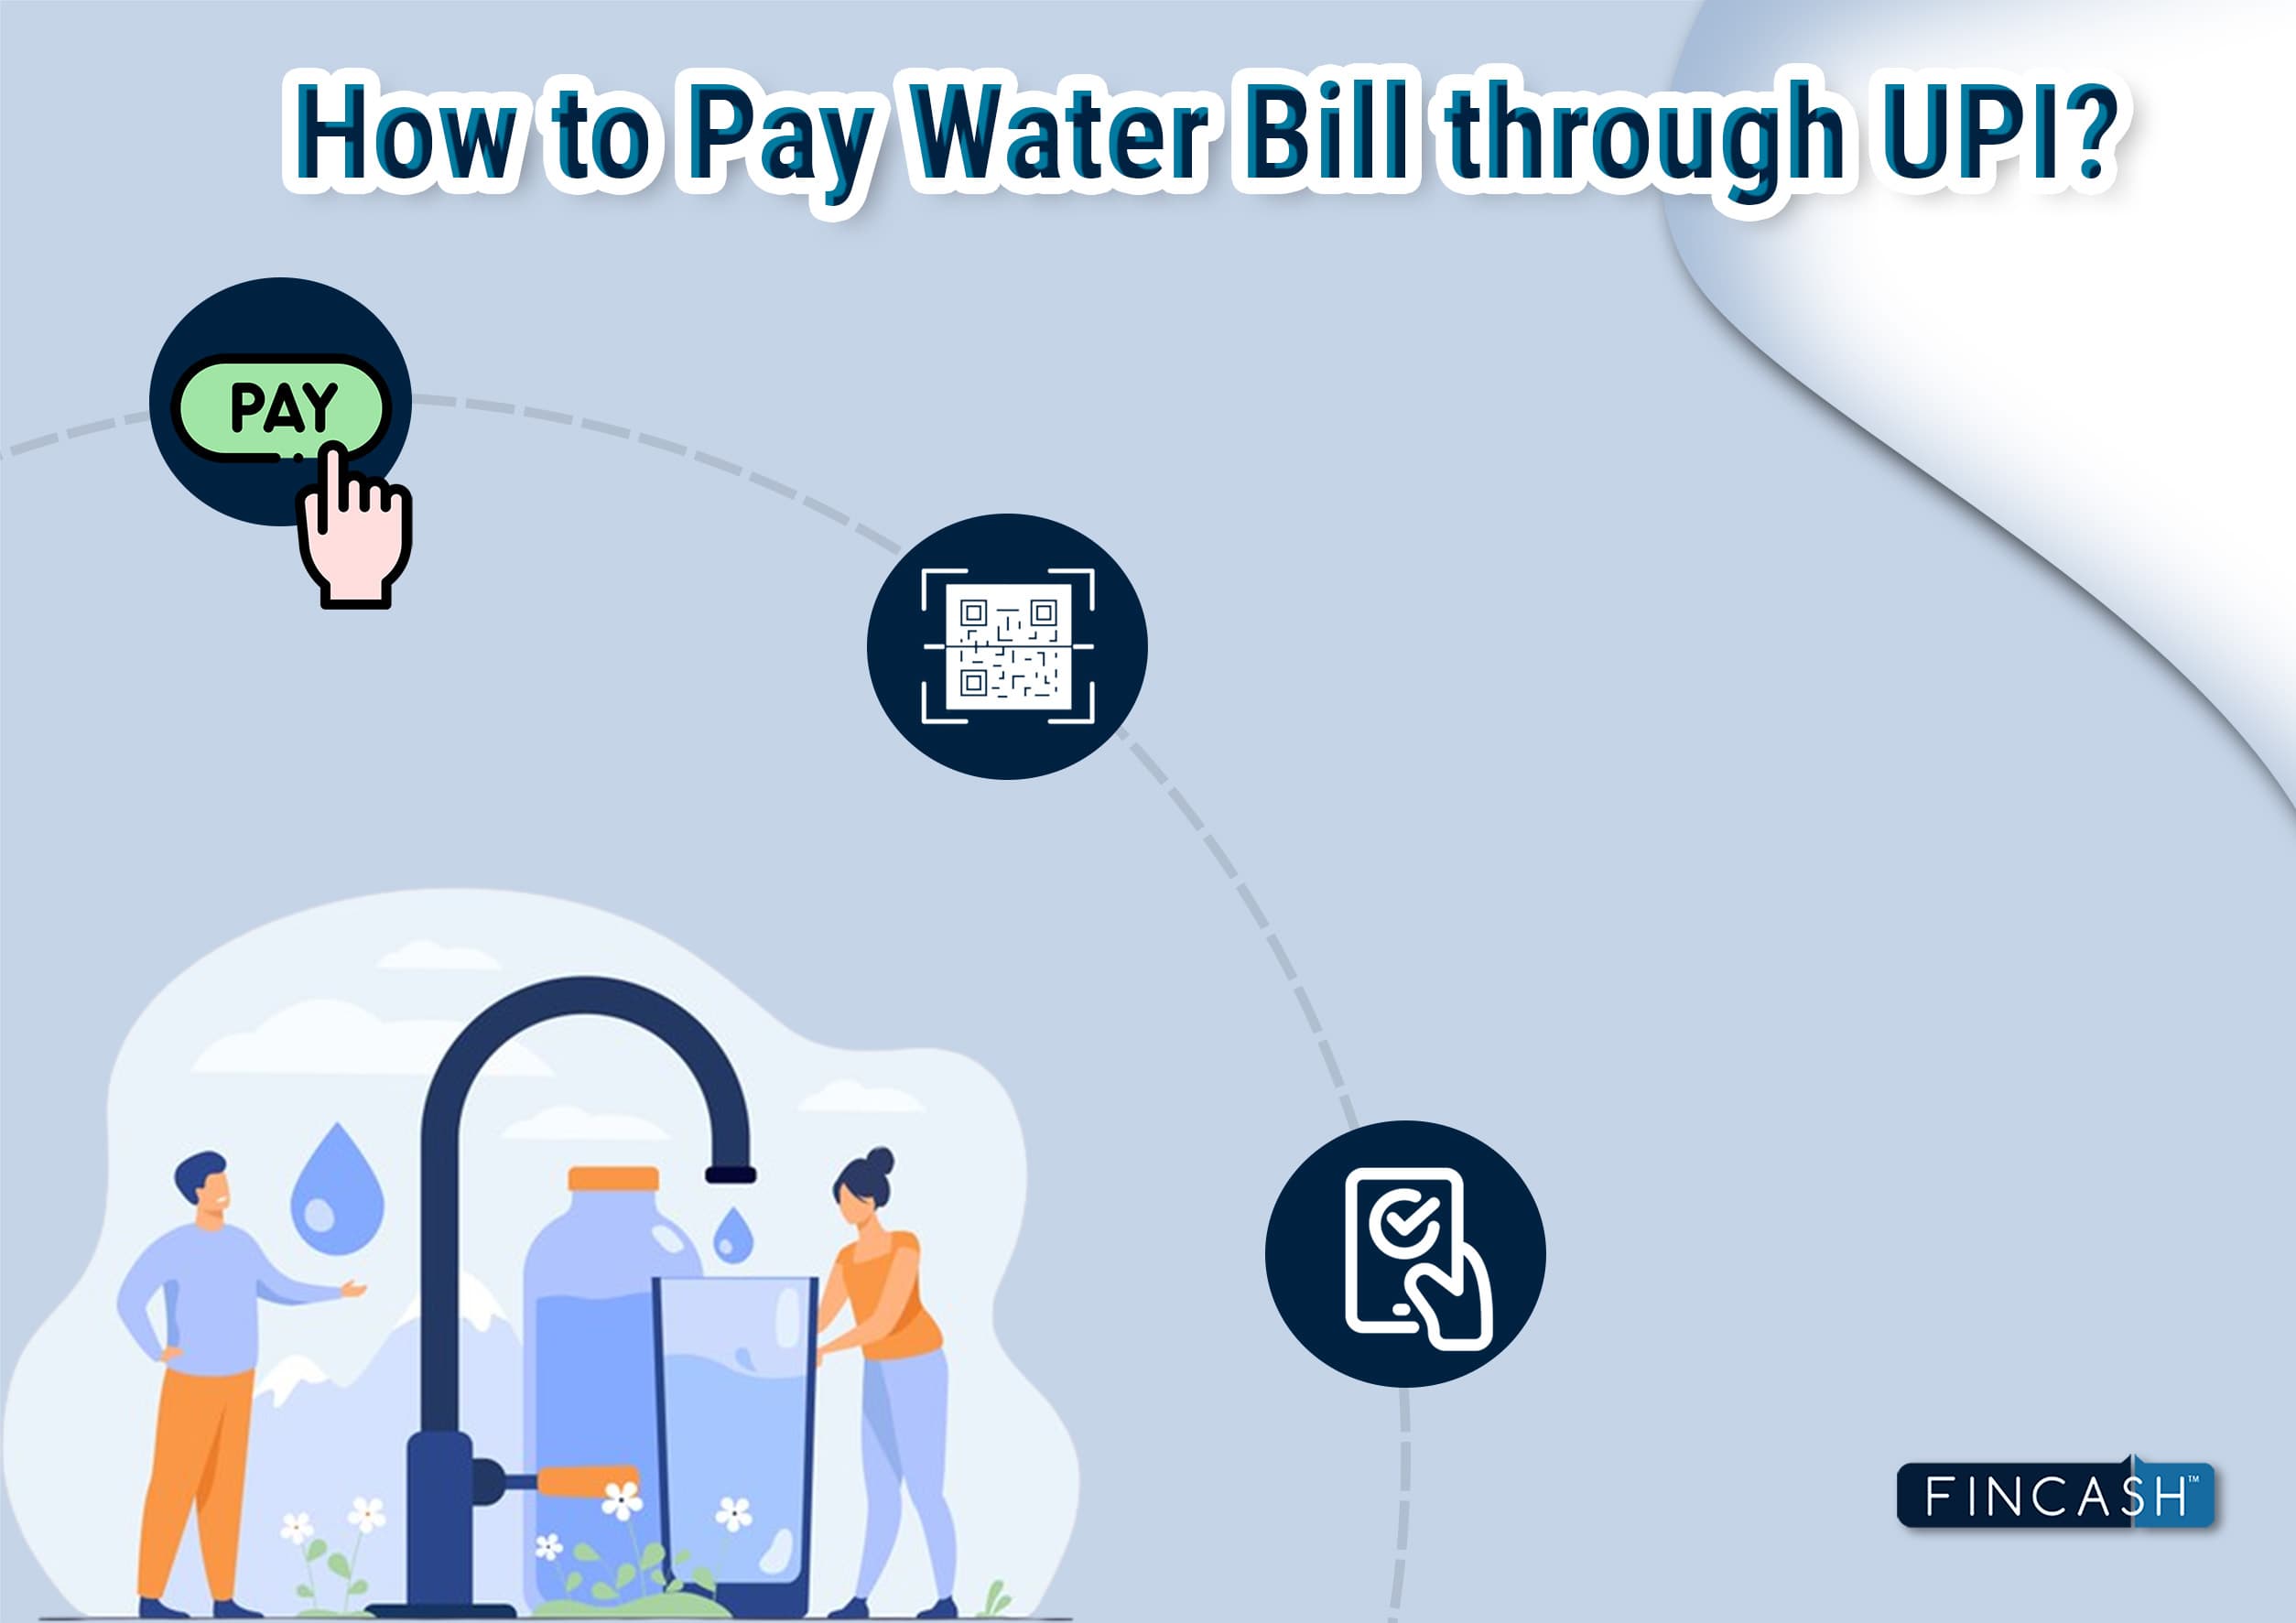 How to Pay Water Bill Through UPI?